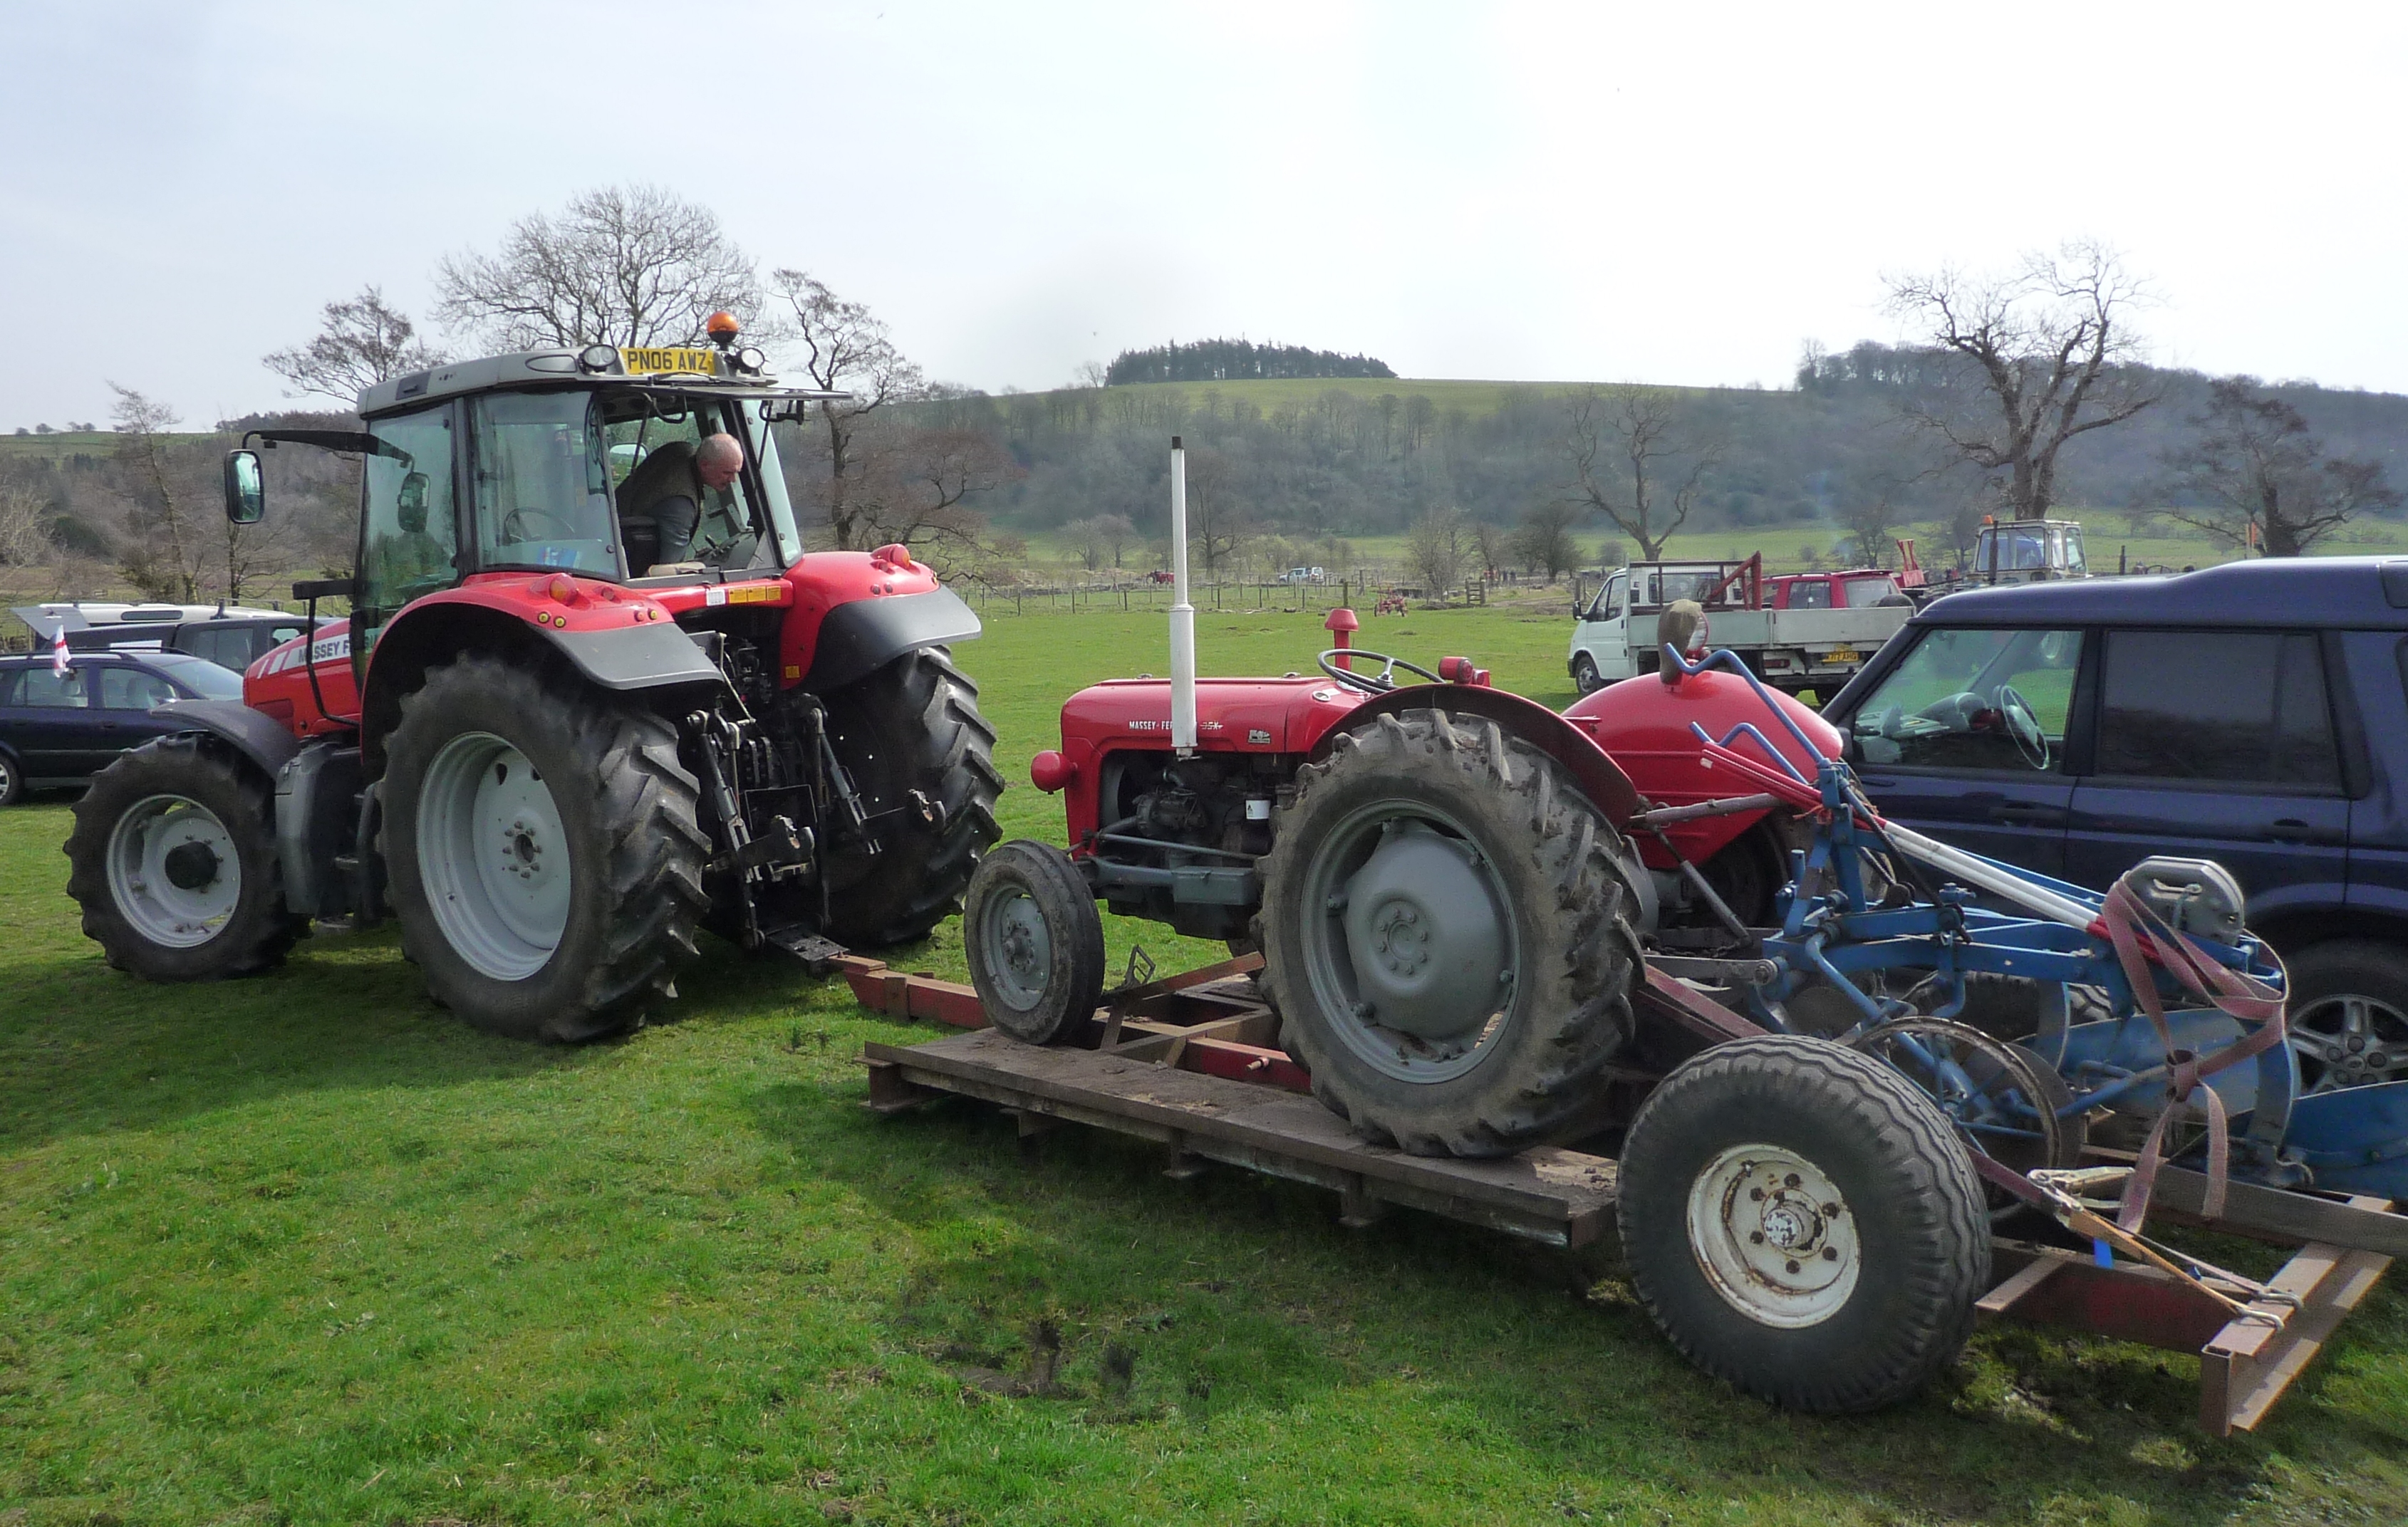 Red Massey Ferguson tractor towing a trailer with a red Massey Ferguson 35X in Bolton-By-Bowland, England